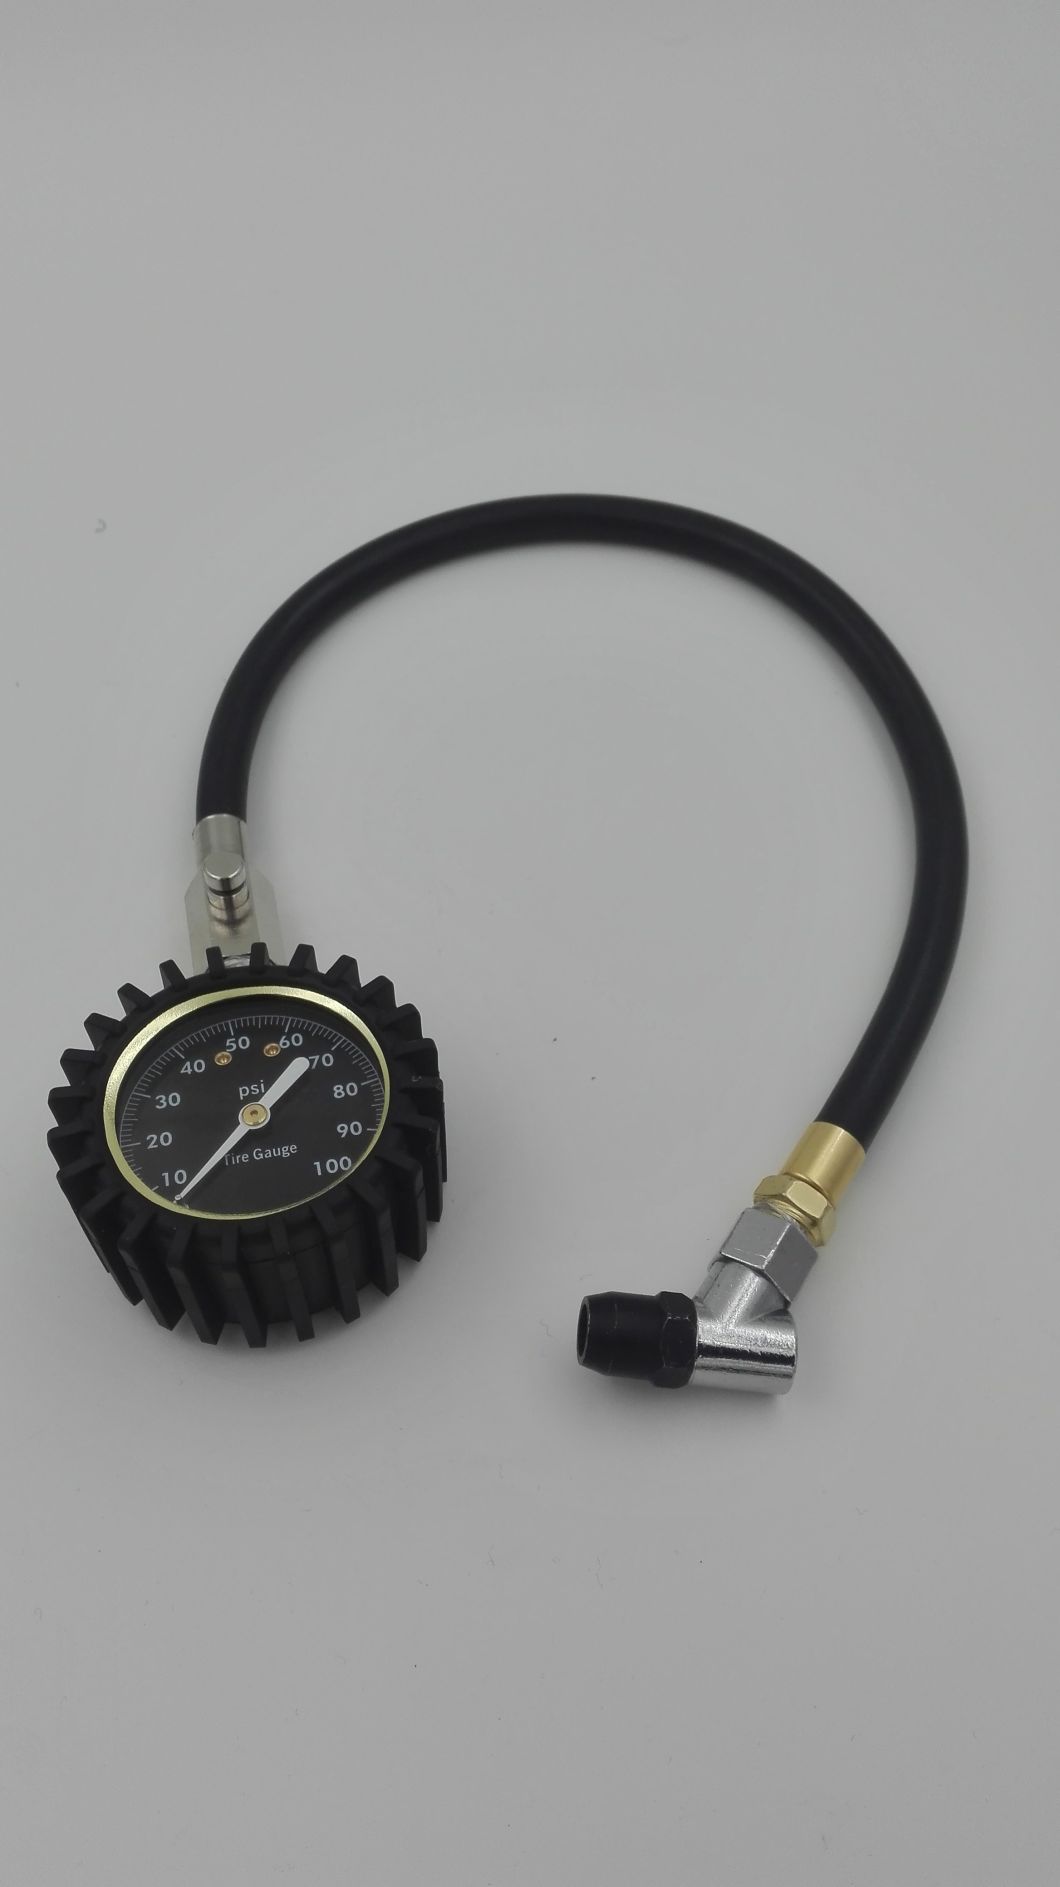 Multiple Functions Meter Tire Pressure Gauge with Air Chuck and Hose